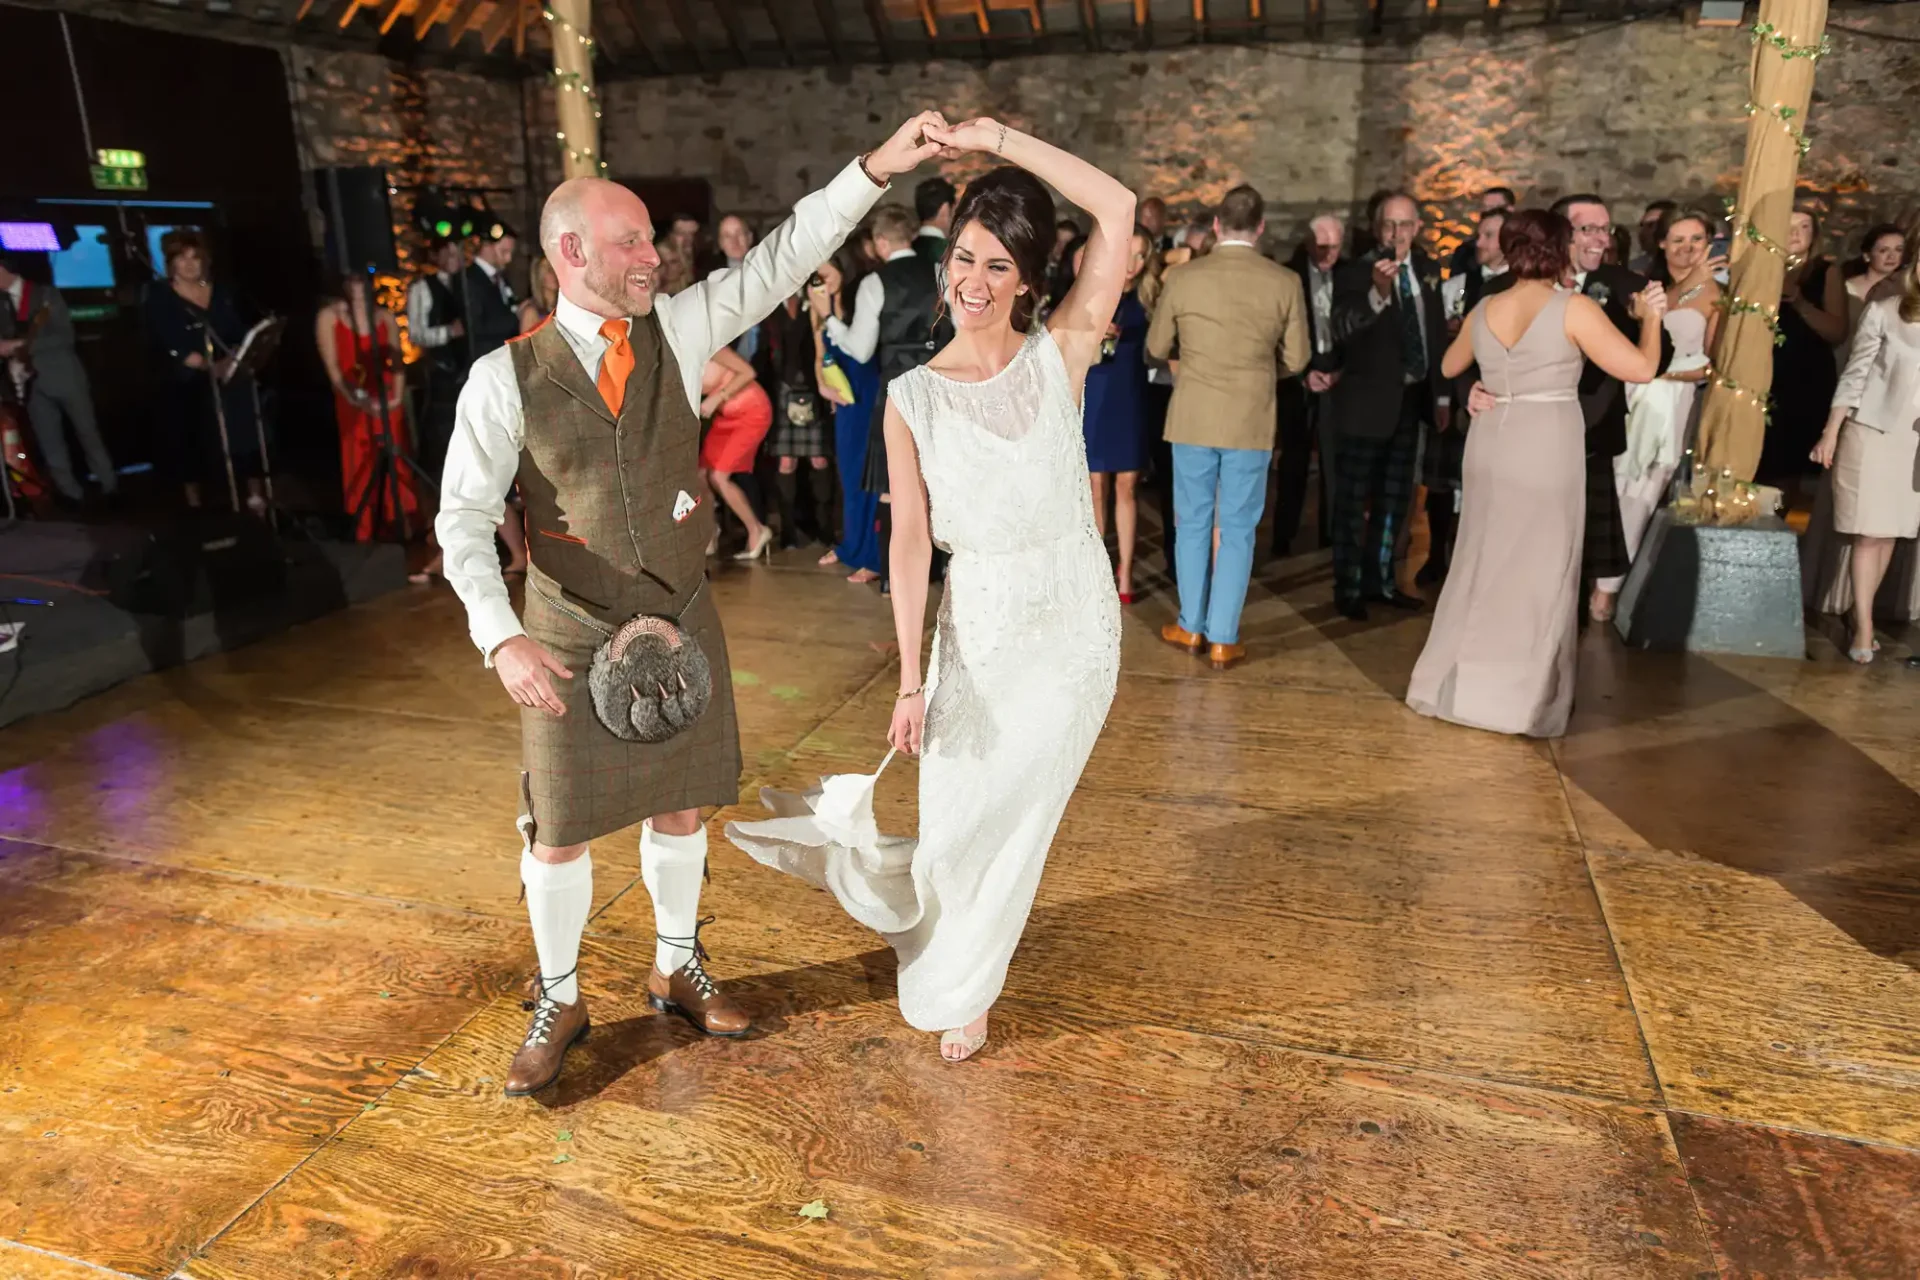 A bride and groom in traditional scottish attire dancing joyfully at their wedding reception, surrounded by guests.